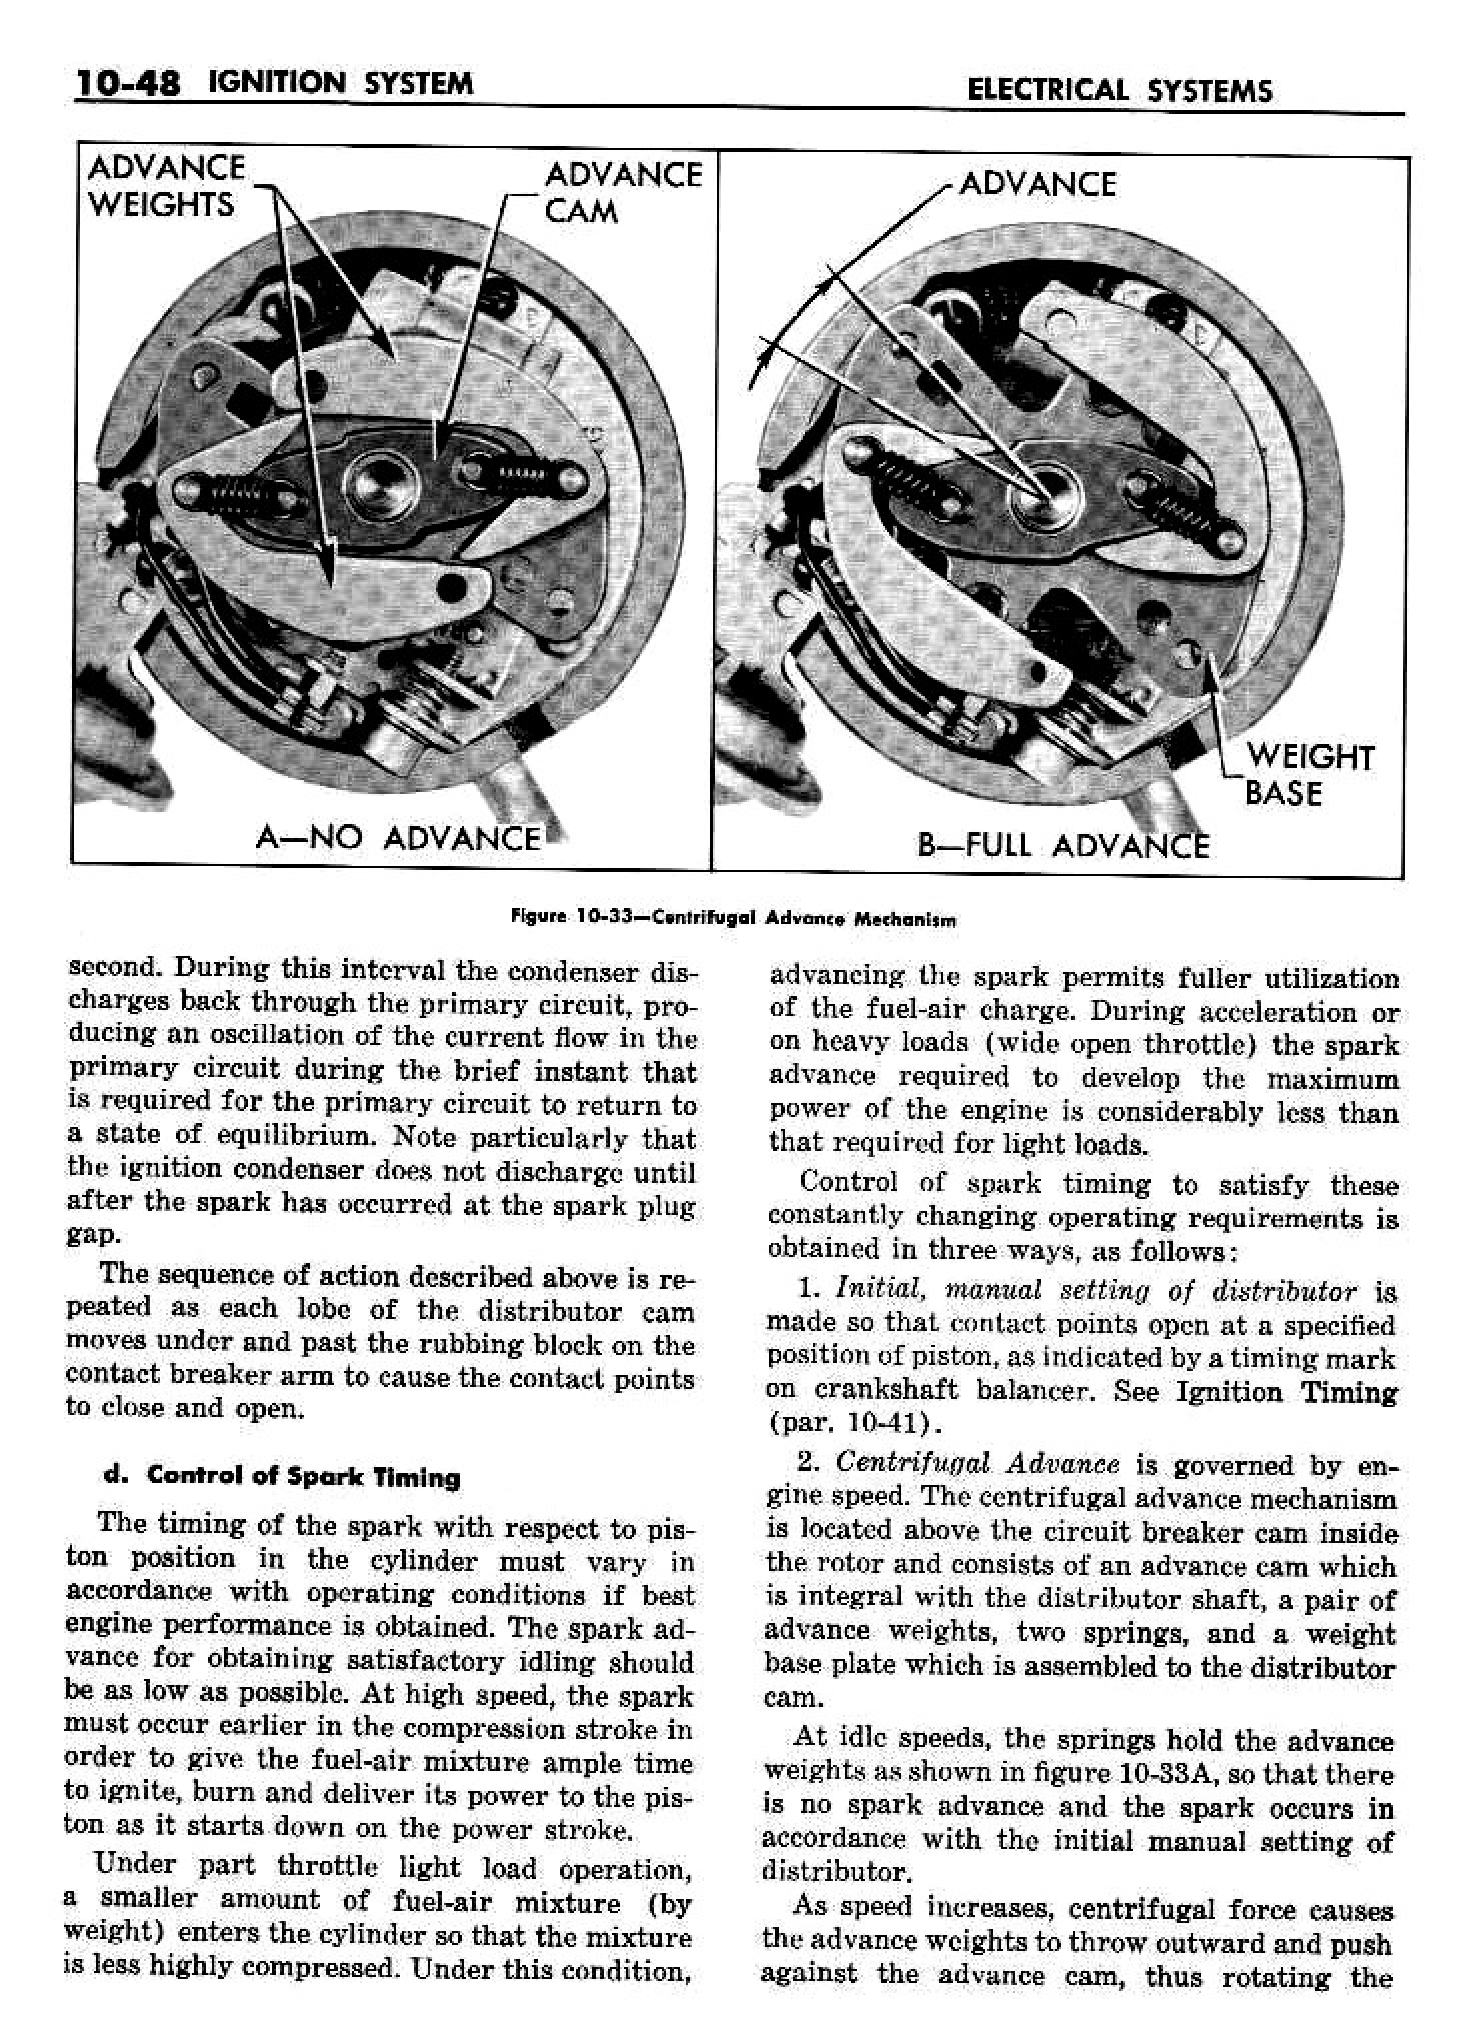 n_11 1958 Buick Shop Manual - Electrical Systems_48.jpg